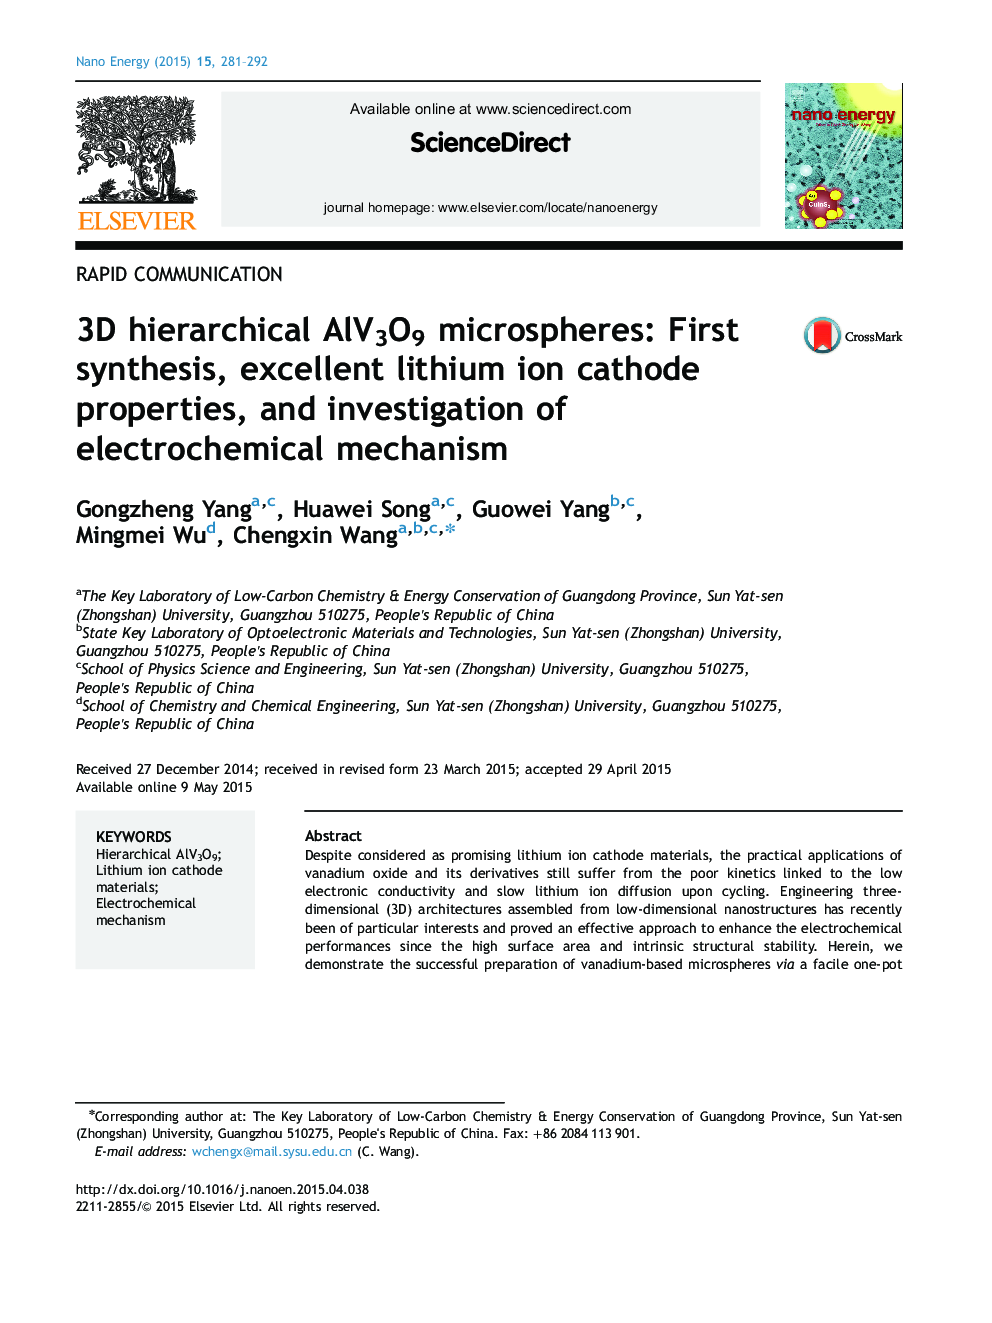 3D hierarchical AlV3O9 microspheres: First synthesis, excellent lithium ion cathode properties, and investigation of electrochemical mechanism